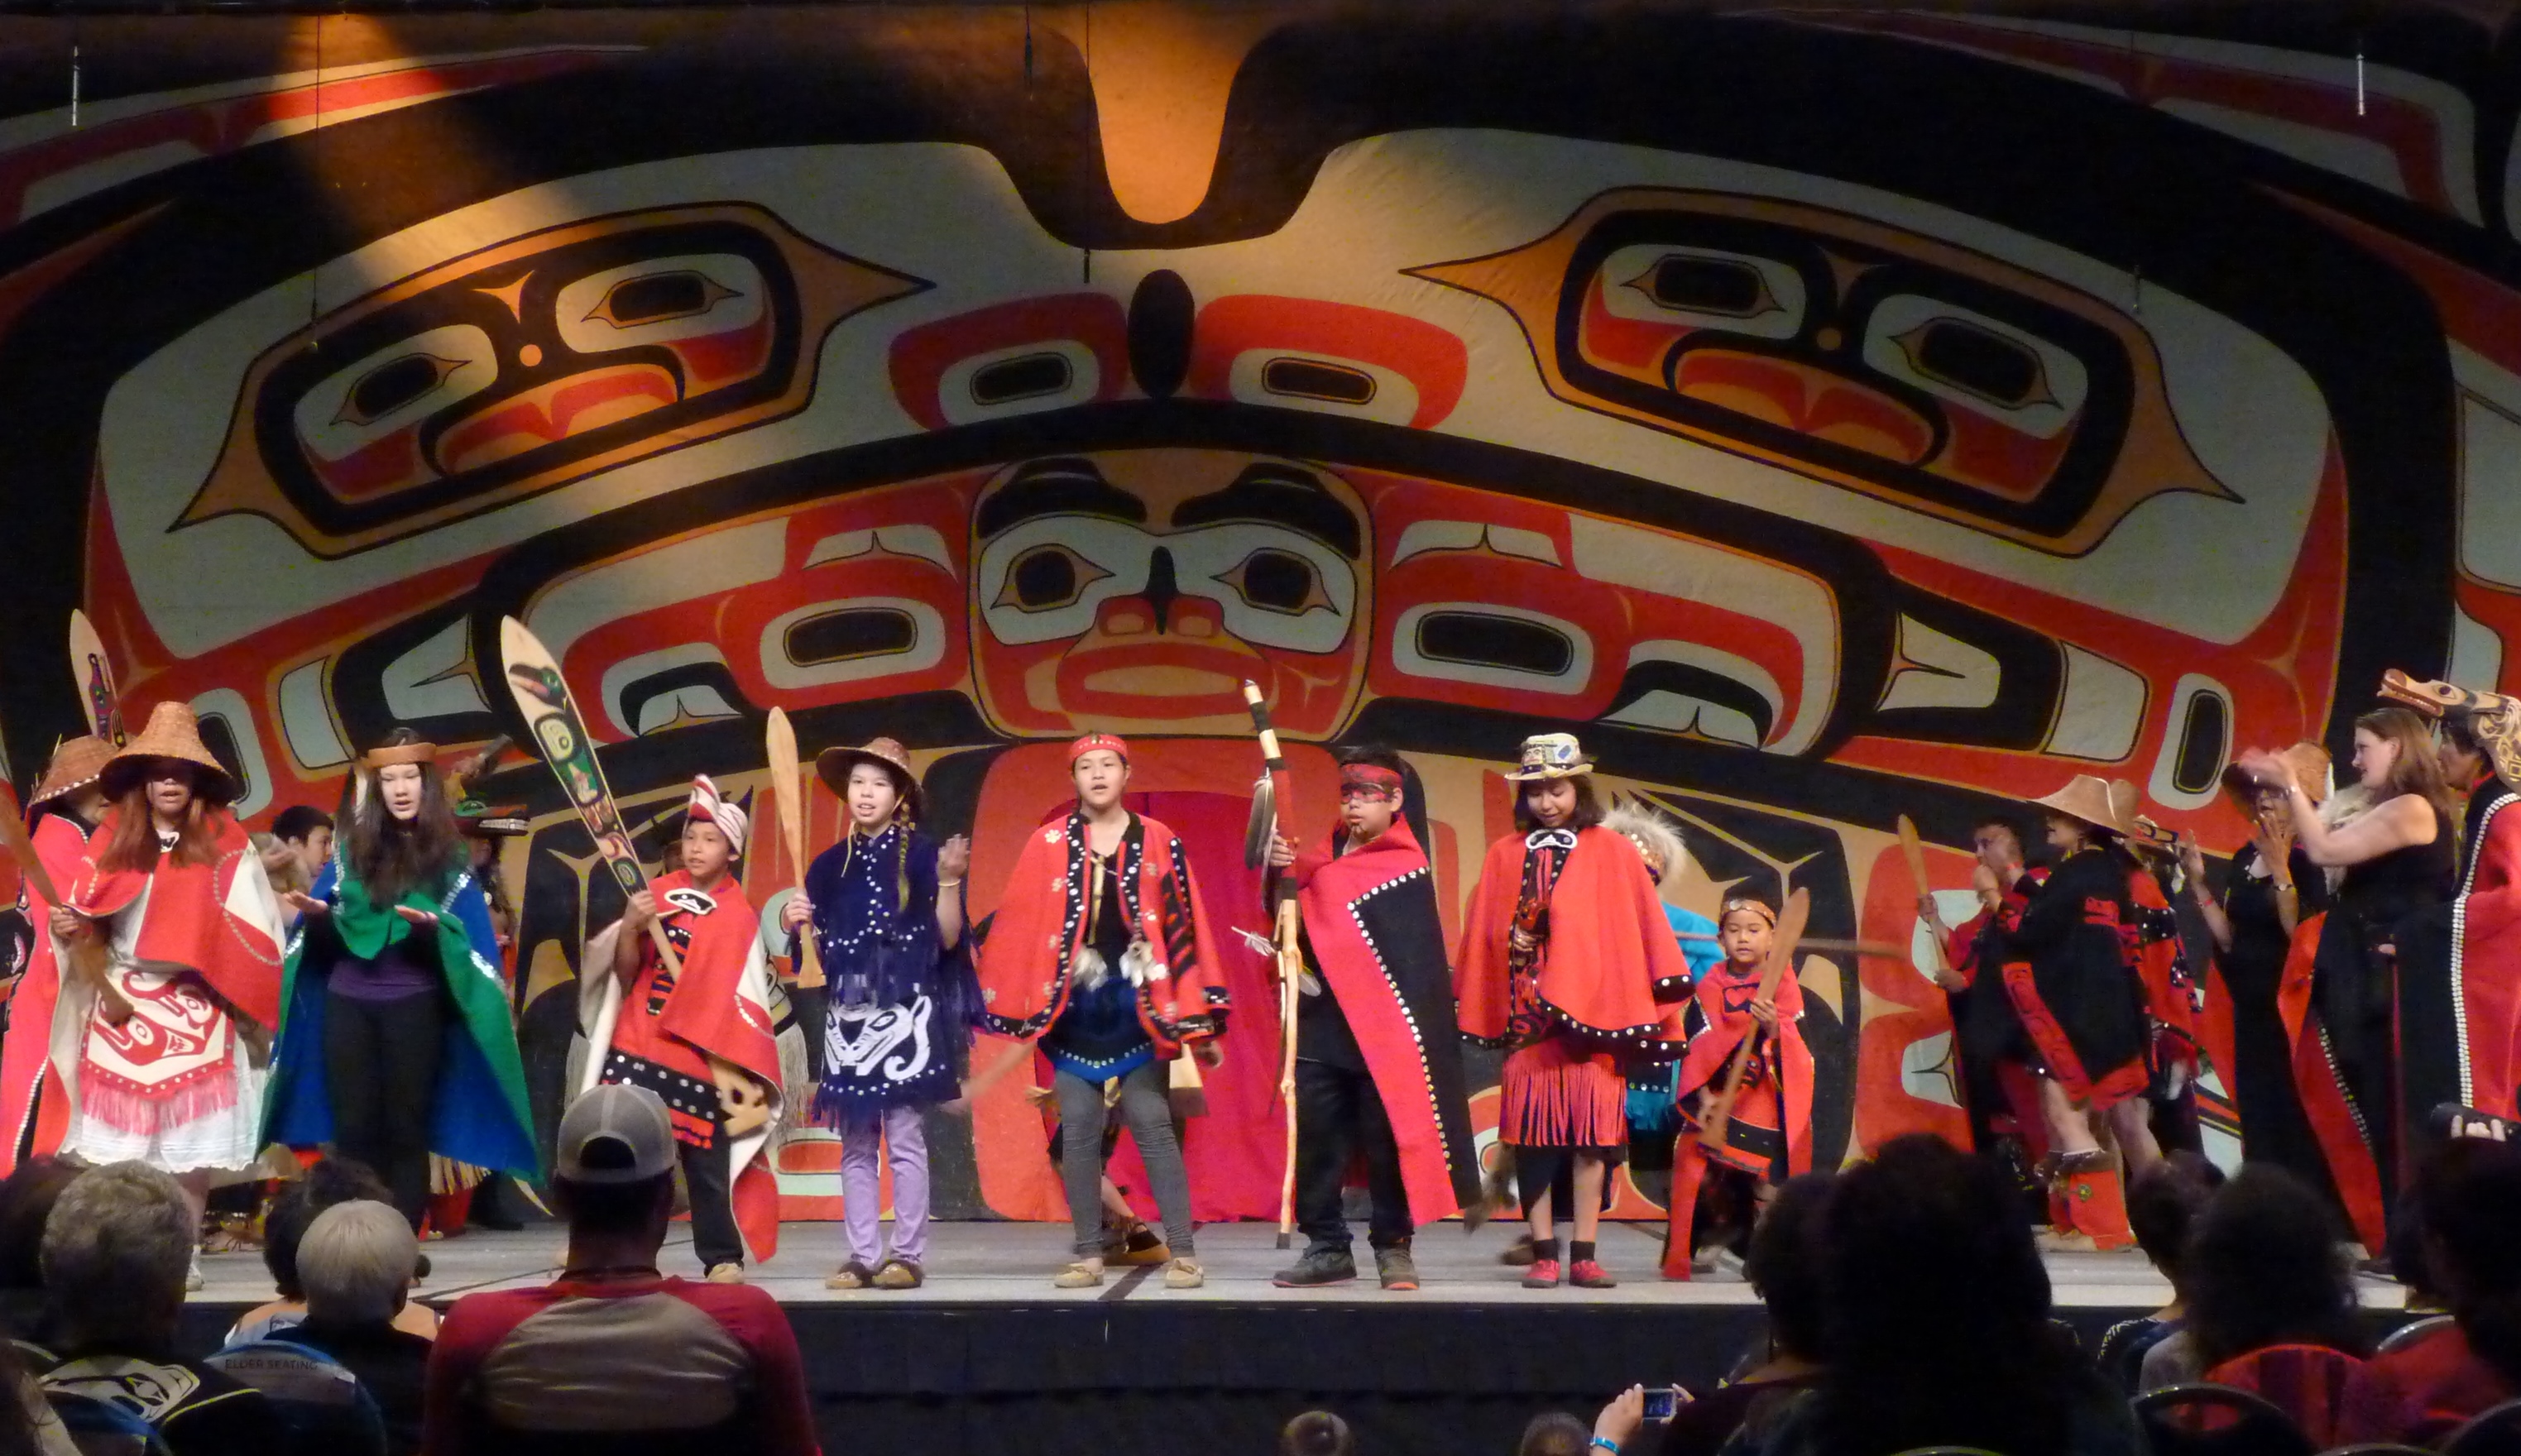 Taku Kwaan dancers perform June 10 as part of Celebration 2016. The group is from Atlin, British Columbia, and included relatives from Juneau. (Photo by Ed Schoenfeld, CoastAlaska - Juneau)